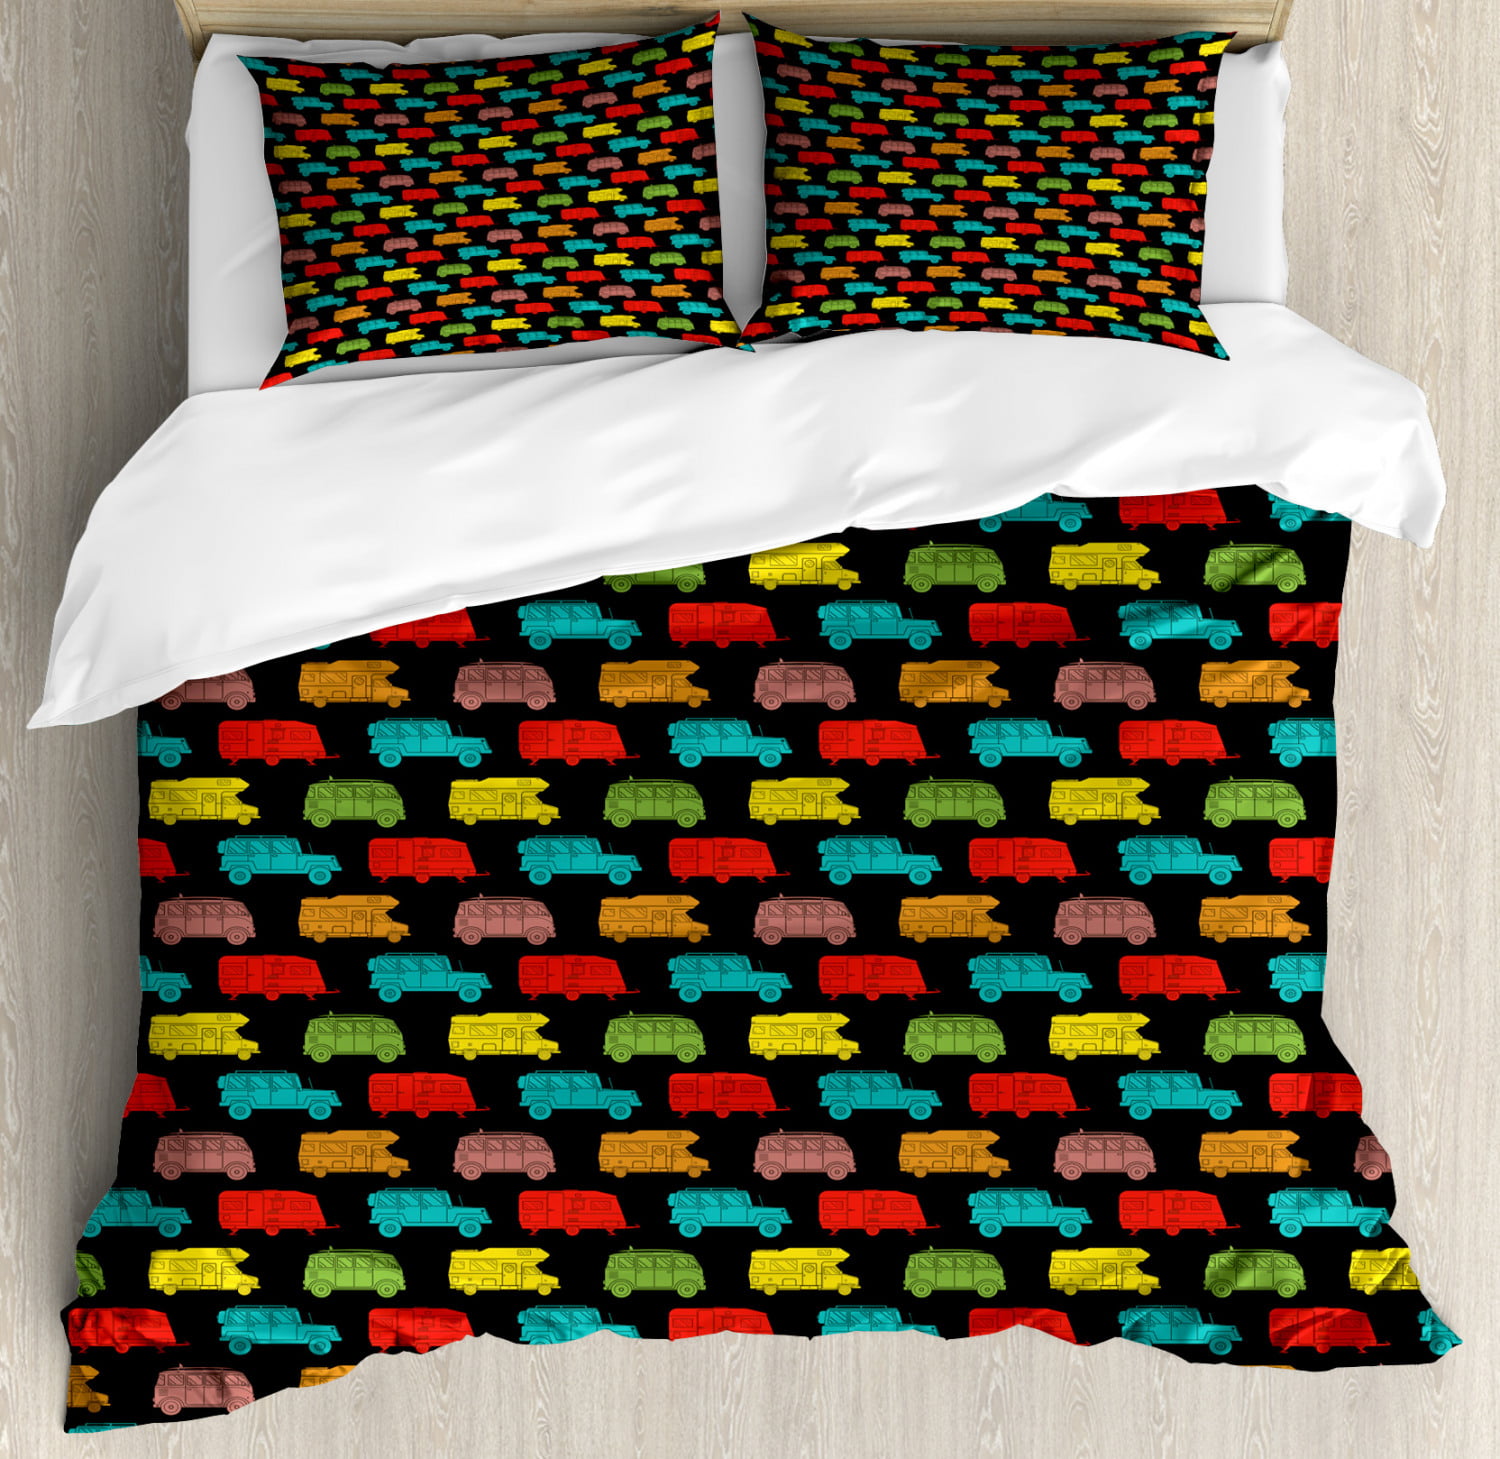 Camper Queen Size Duvet Cover Set Colorful Van And Trailer On